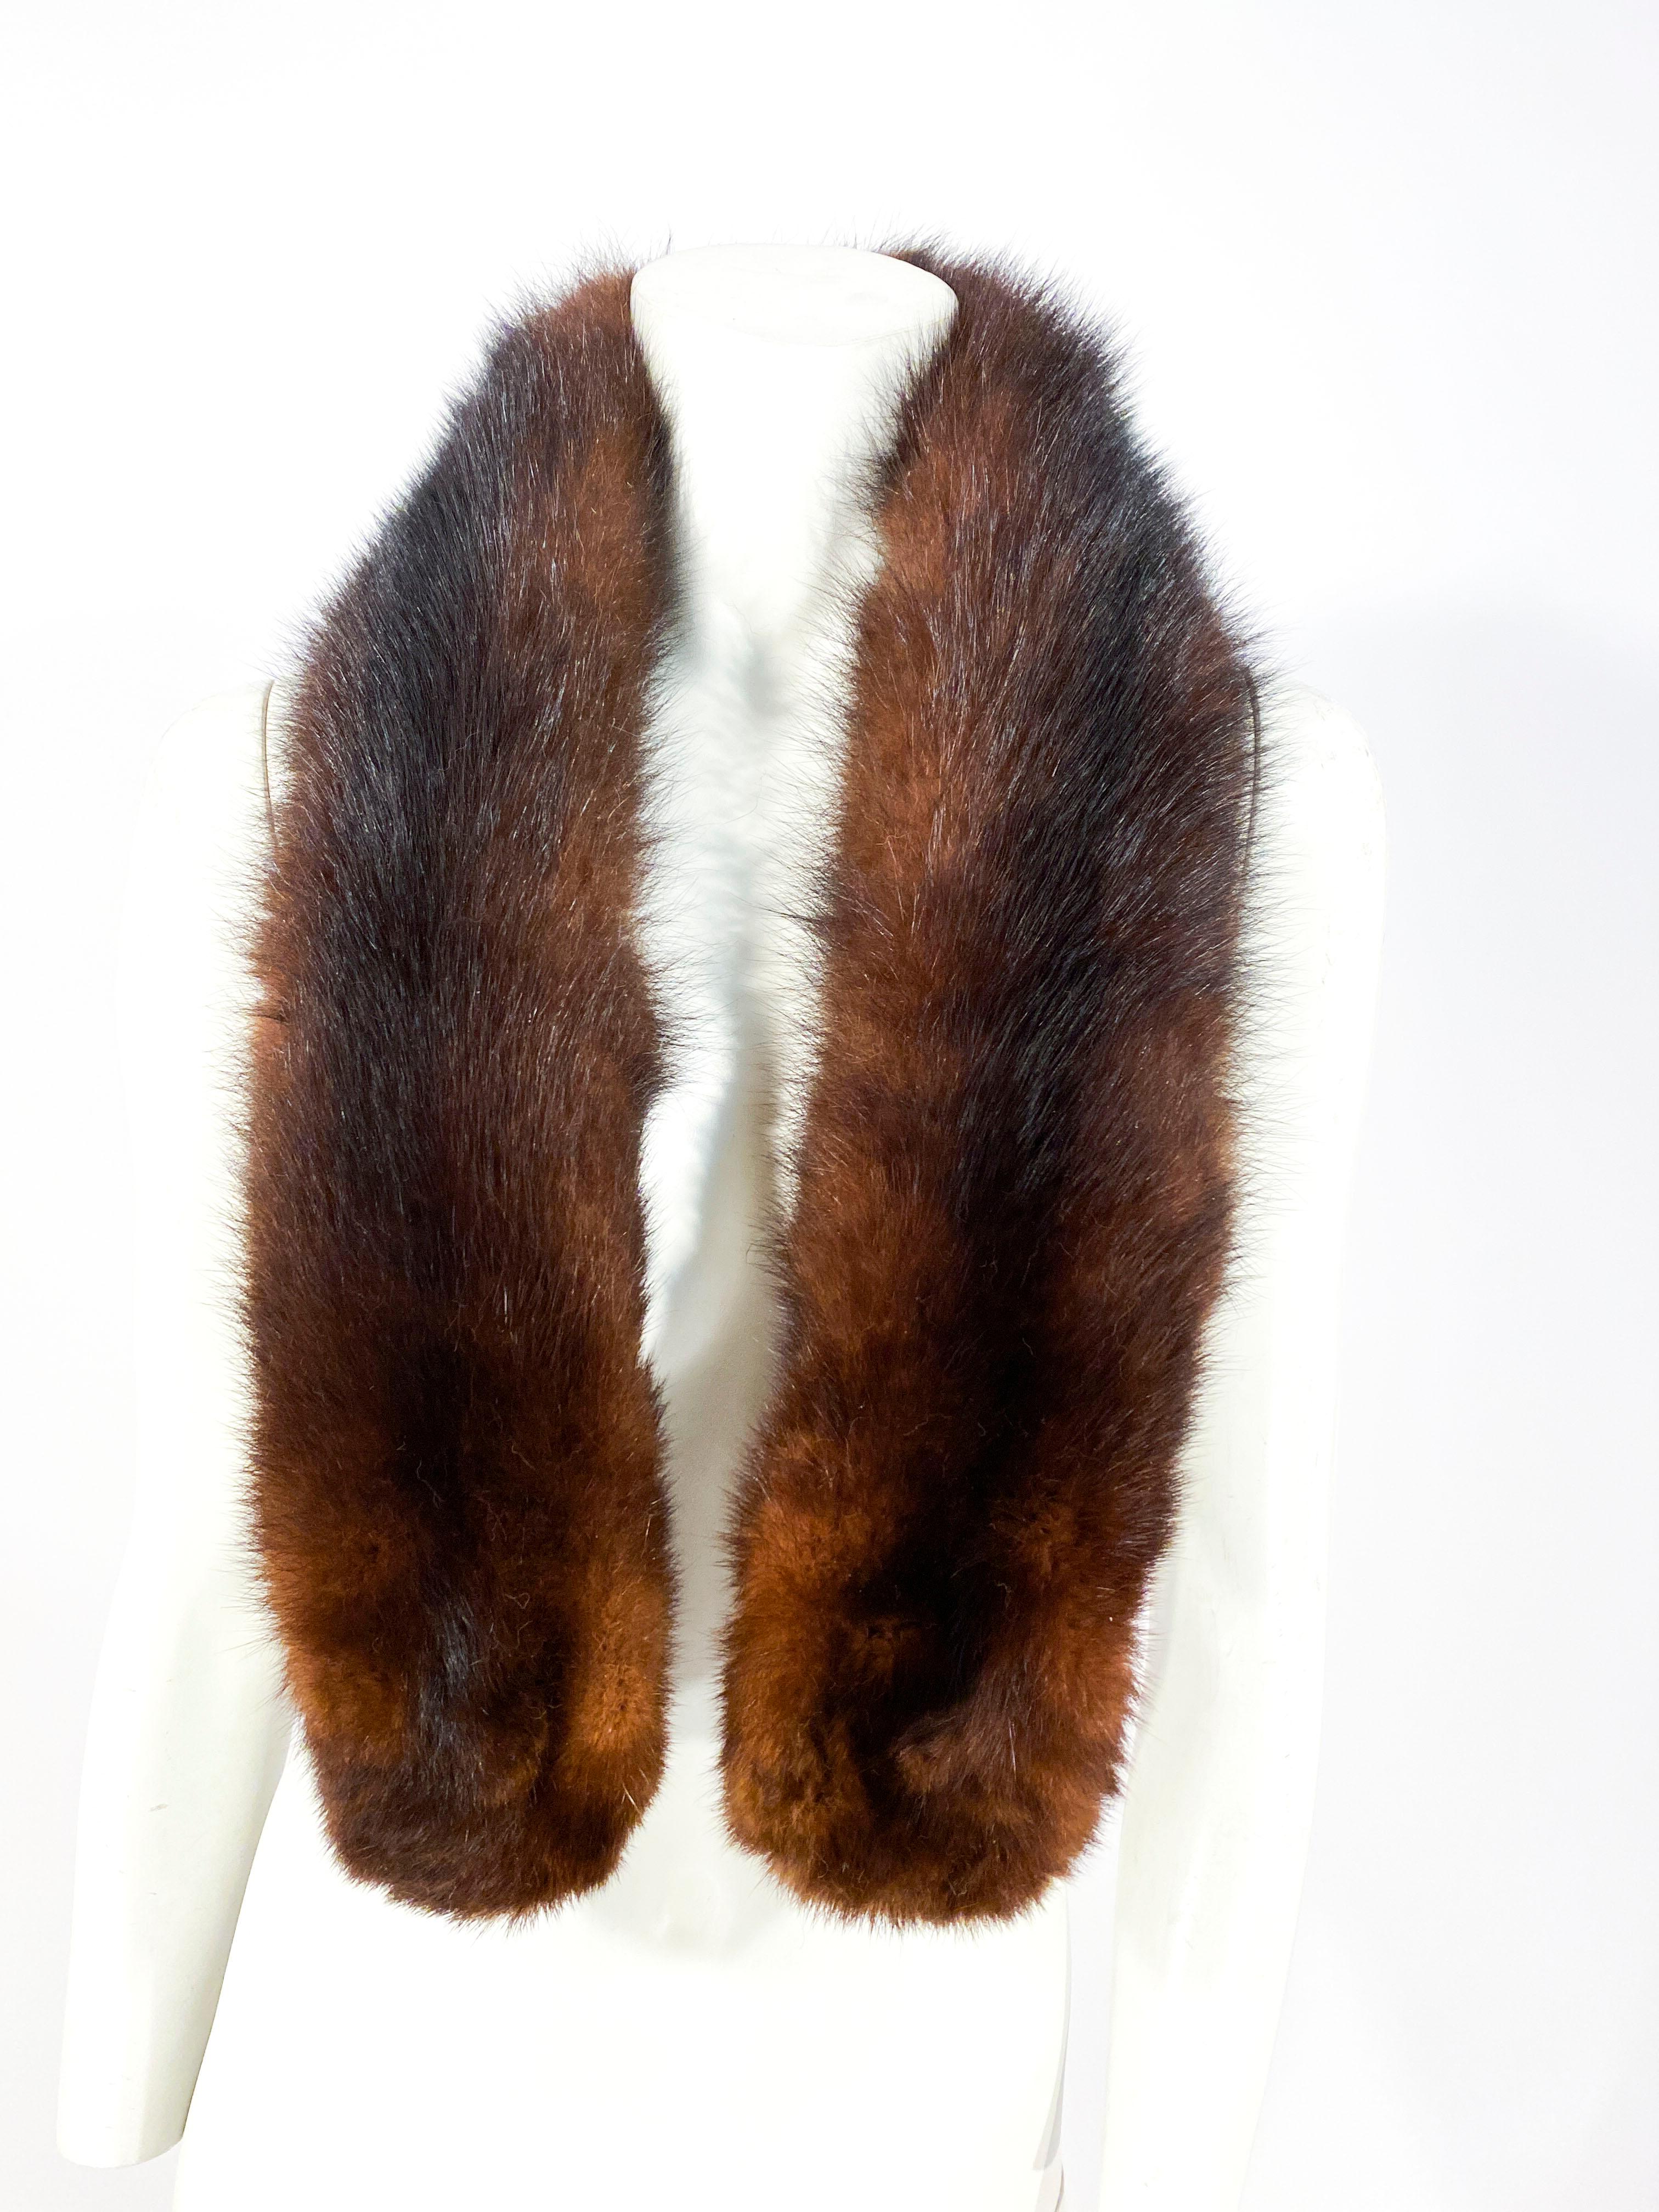 Chocolate brown nutria fur that can be worn as a scarf or a long collar with adjustable closure and a velvet lining.